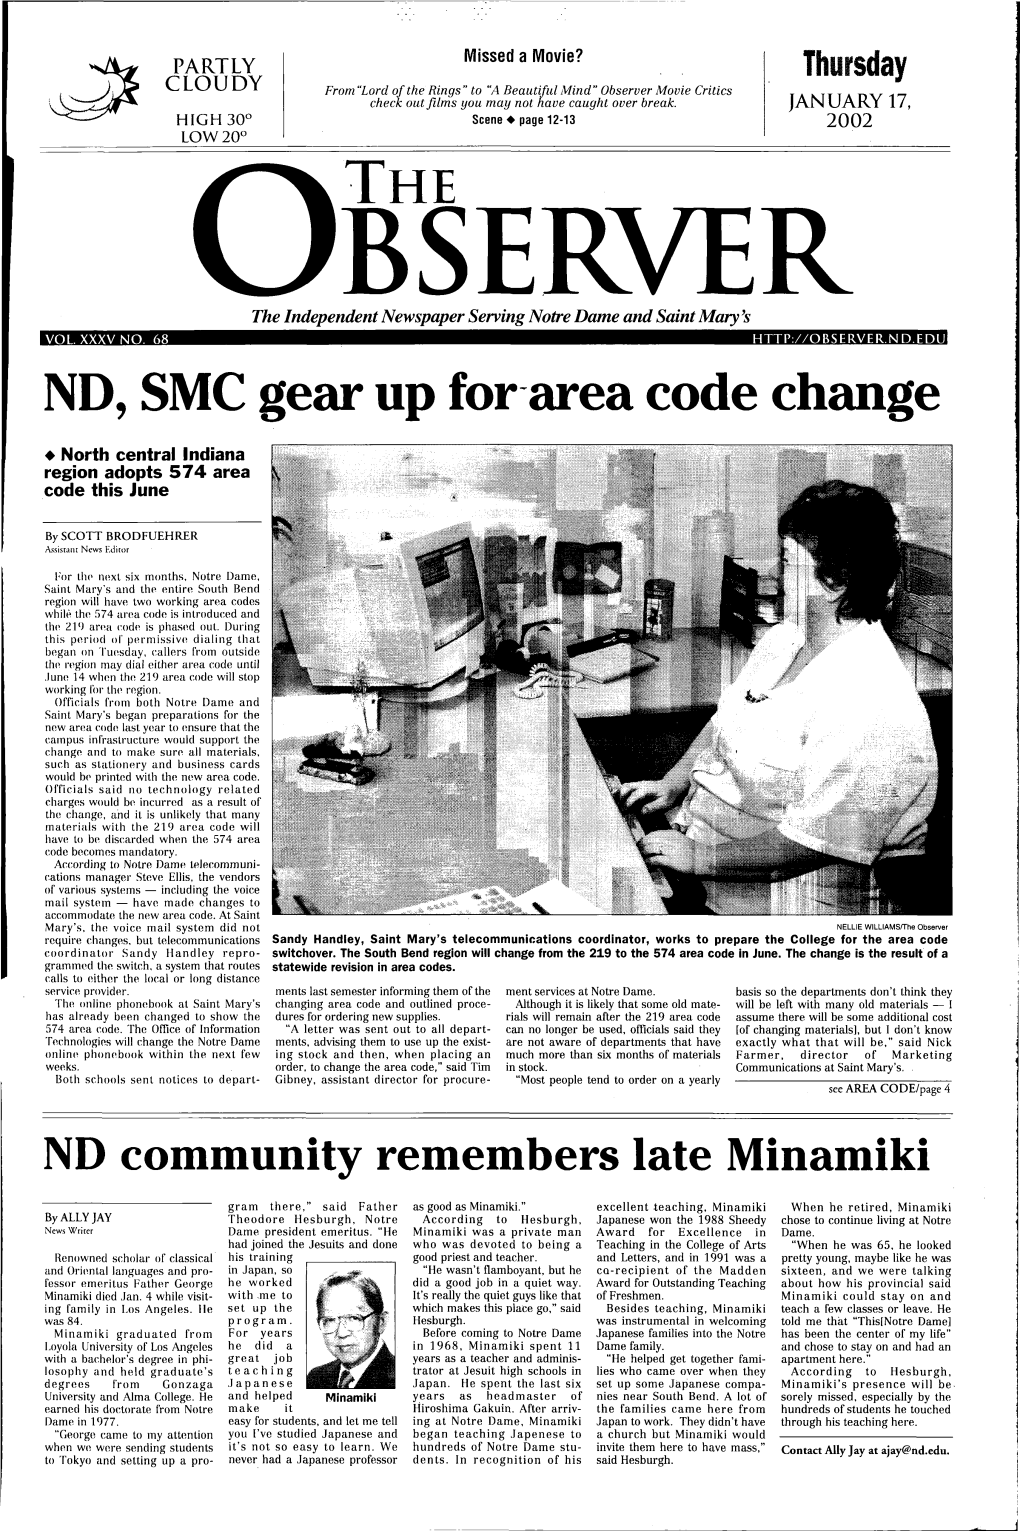 ND, SMC Gear up For-Area Code Change